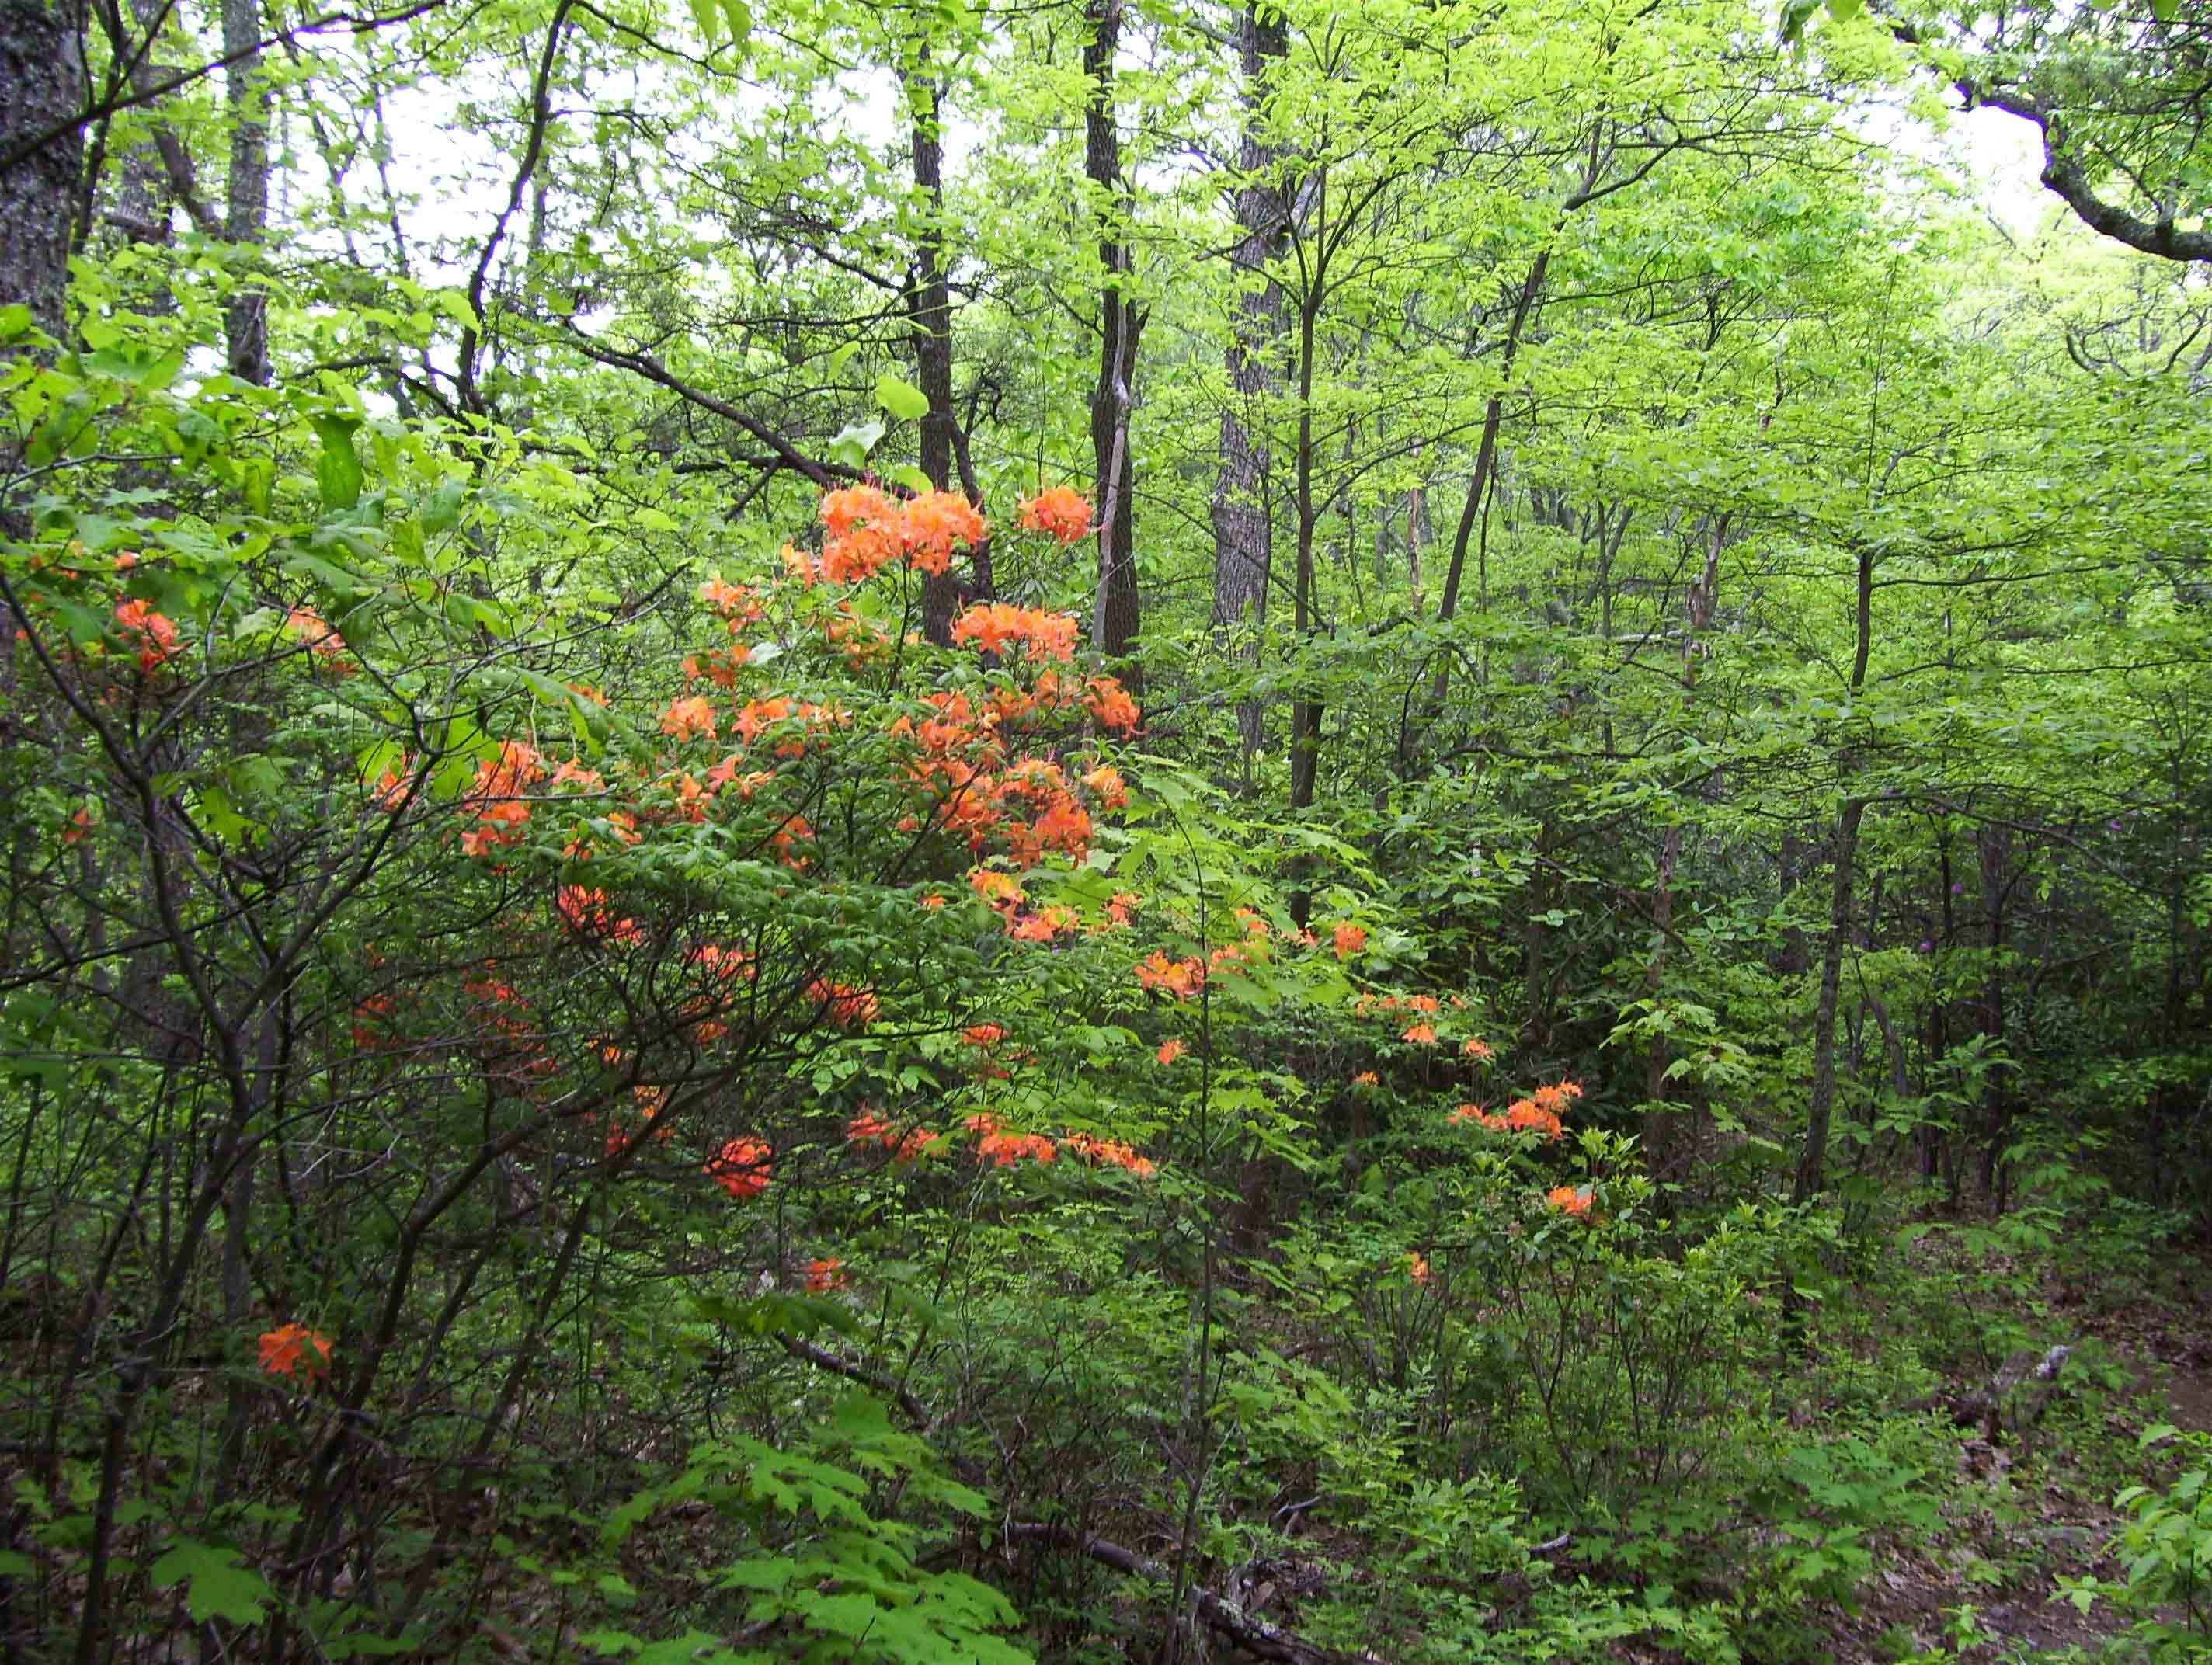 Flame azalea between Knot Maul Shelter (mm 15.2) and the crest of Brushy Mt. (mm 16.5).  Courtesy dlcul@conncoll.edu